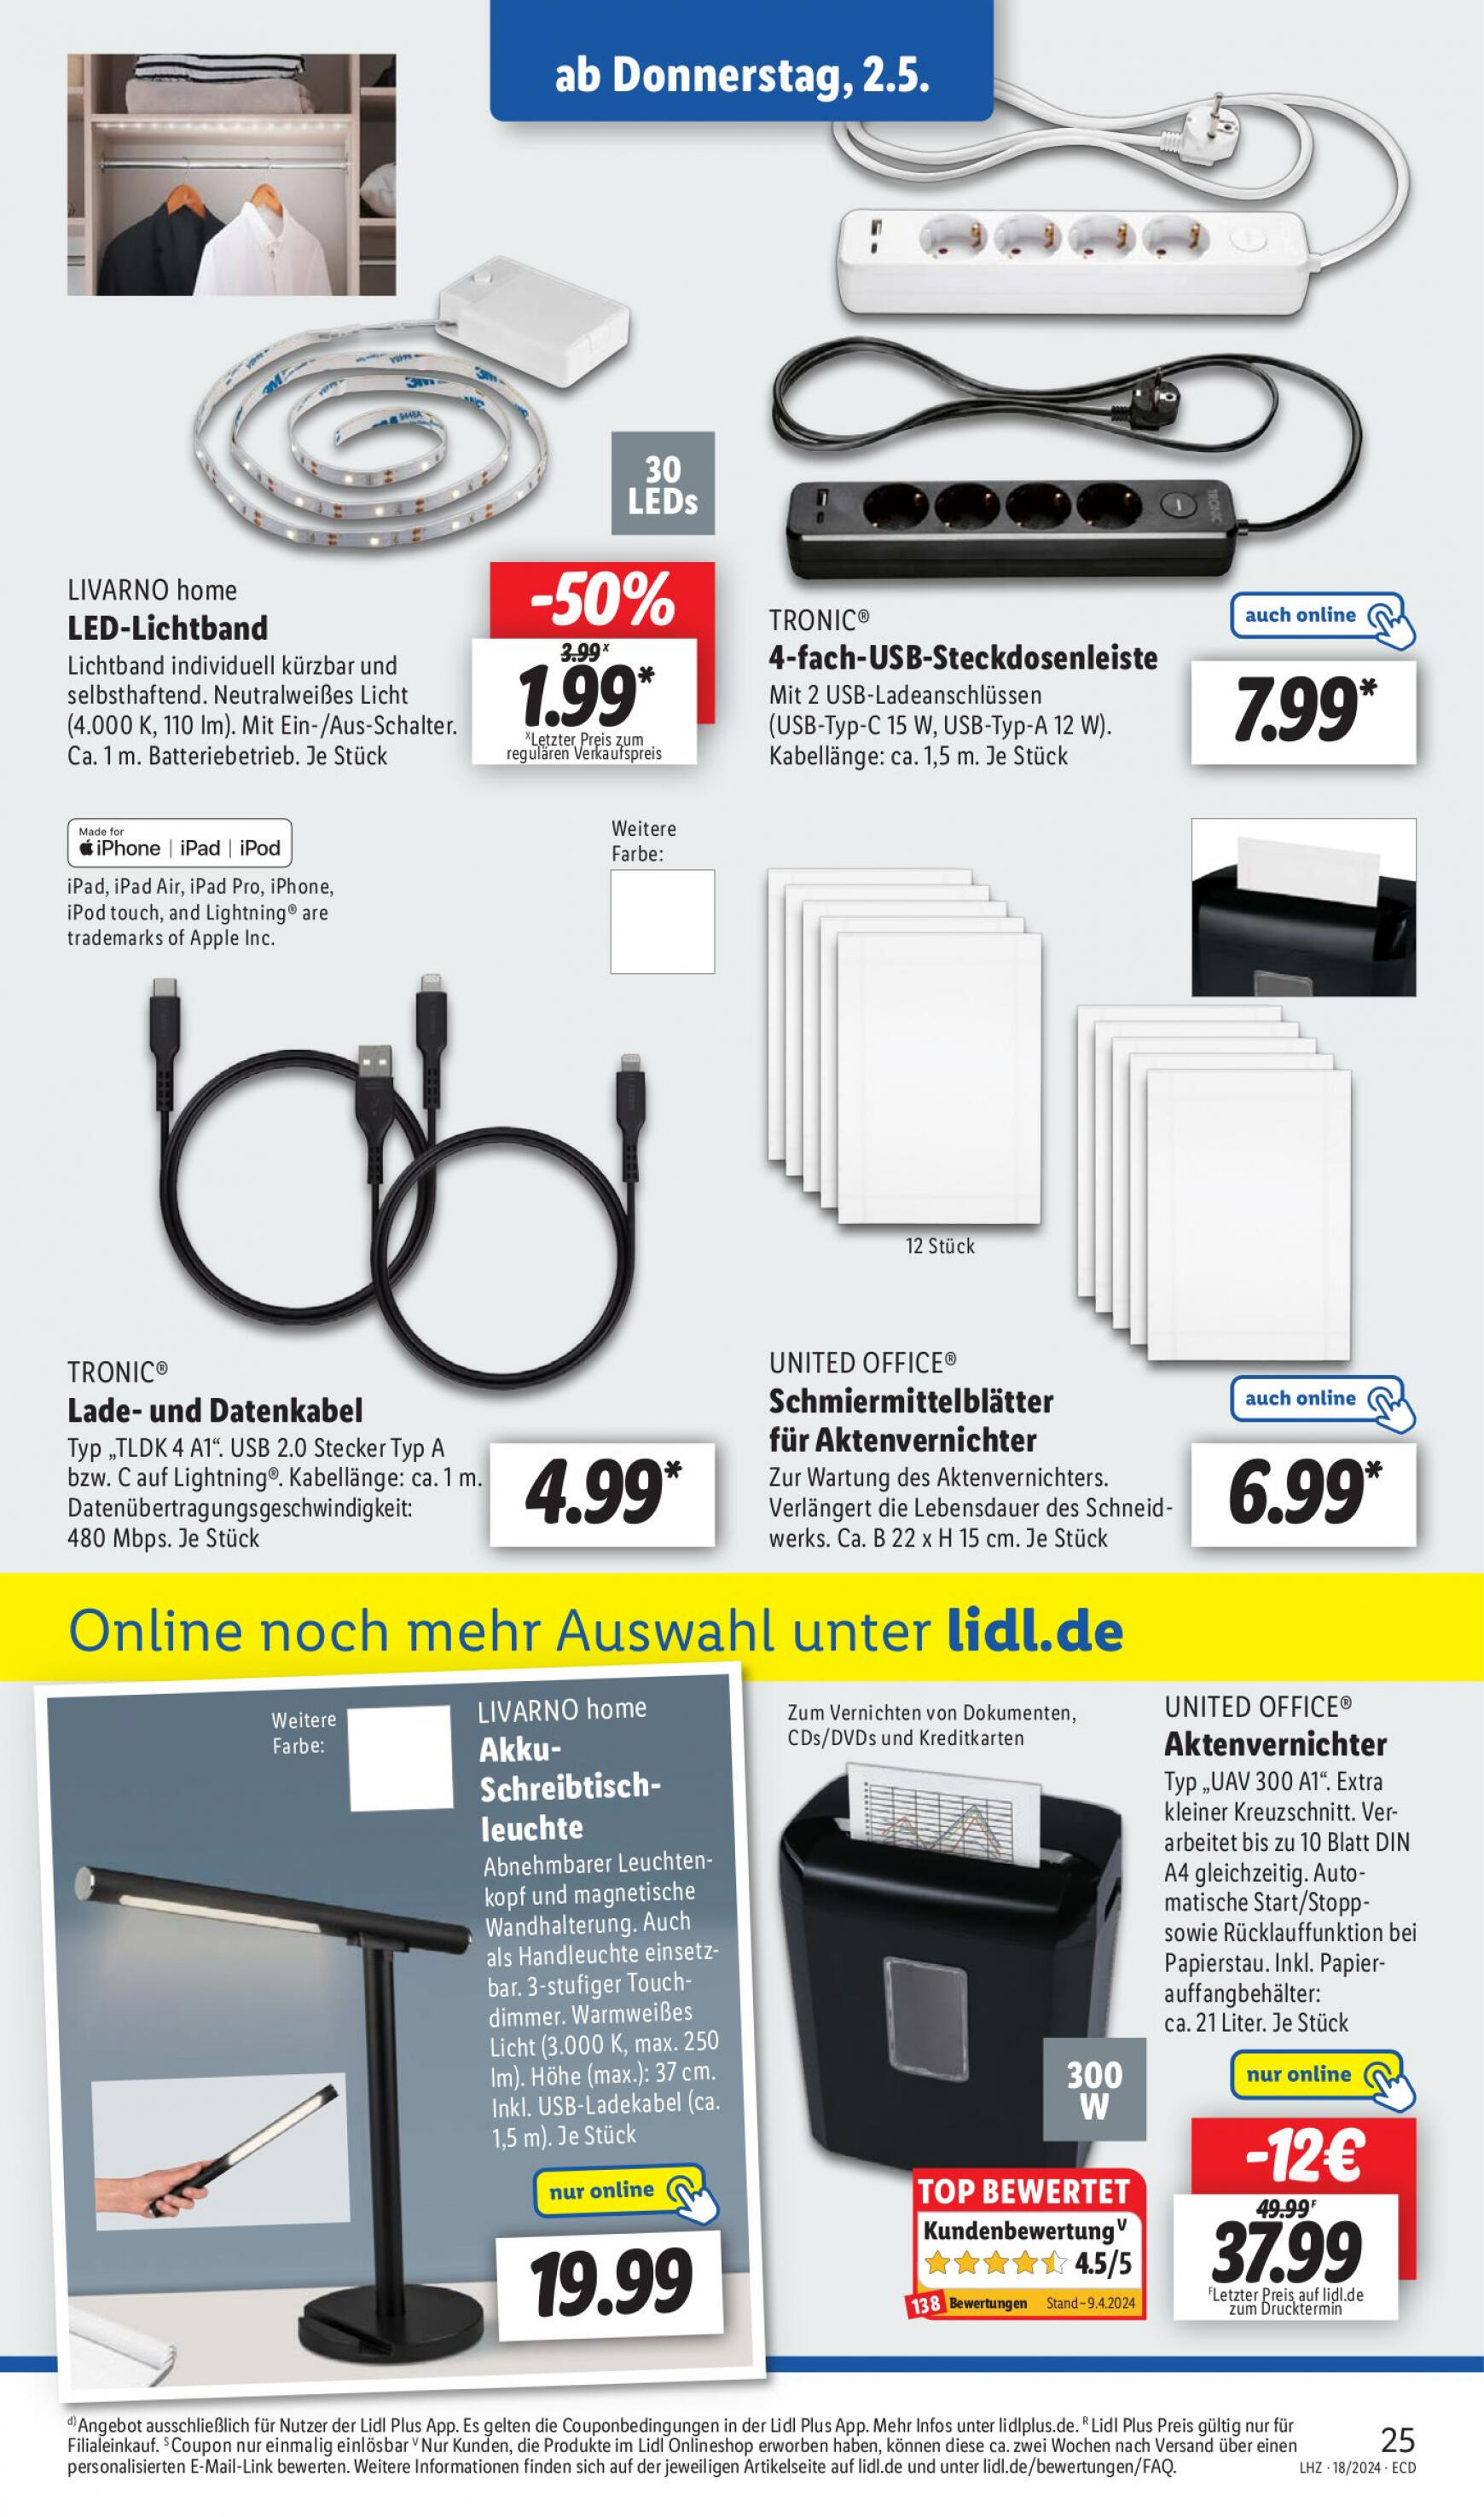 lidl - Flyer Lidl aktuell 29.04. - 04.05. - page: 29